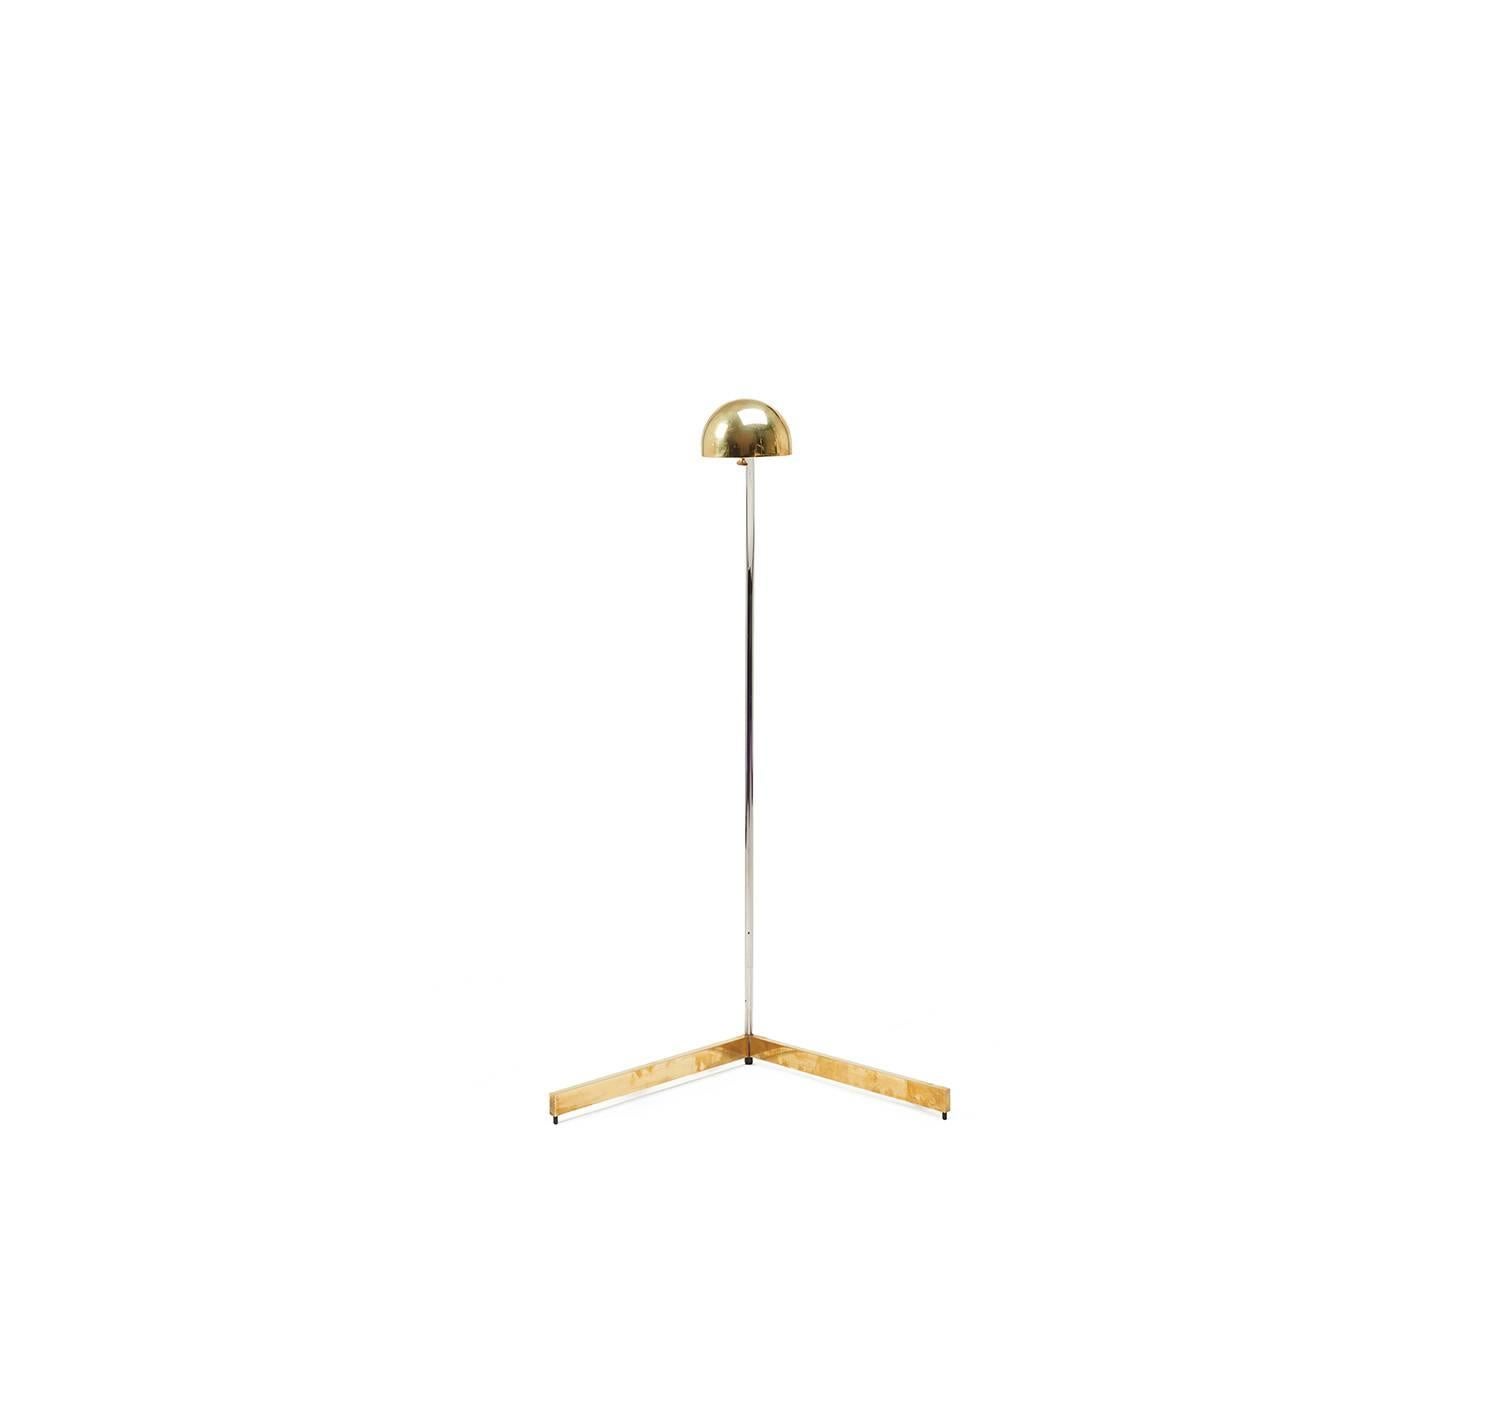 This reading lamp with a brass dimmer switch has a brass V-shaped base and semi-spherical shade that is supported by an arching chrome stem with pivot point that allows the lamp to rotate almost 360 degrees. The combination of metals and shapes make